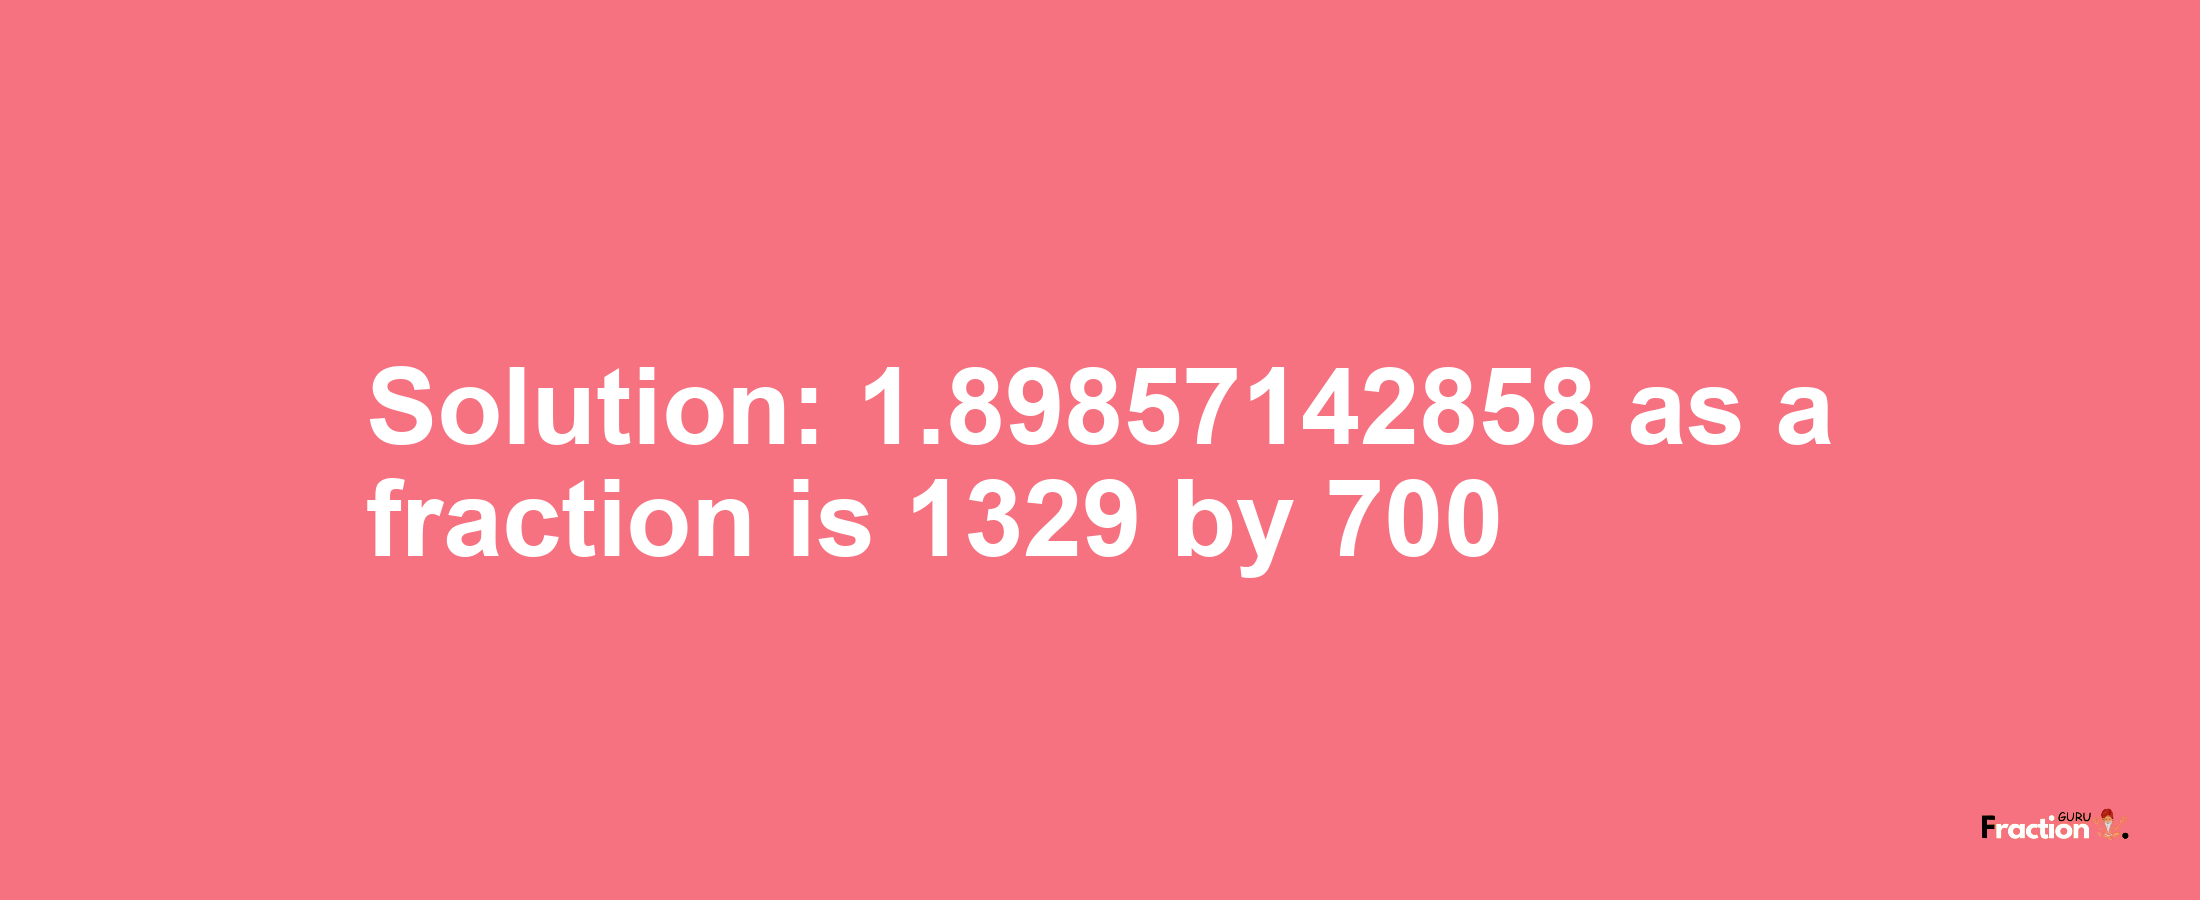 Solution:1.89857142858 as a fraction is 1329/700